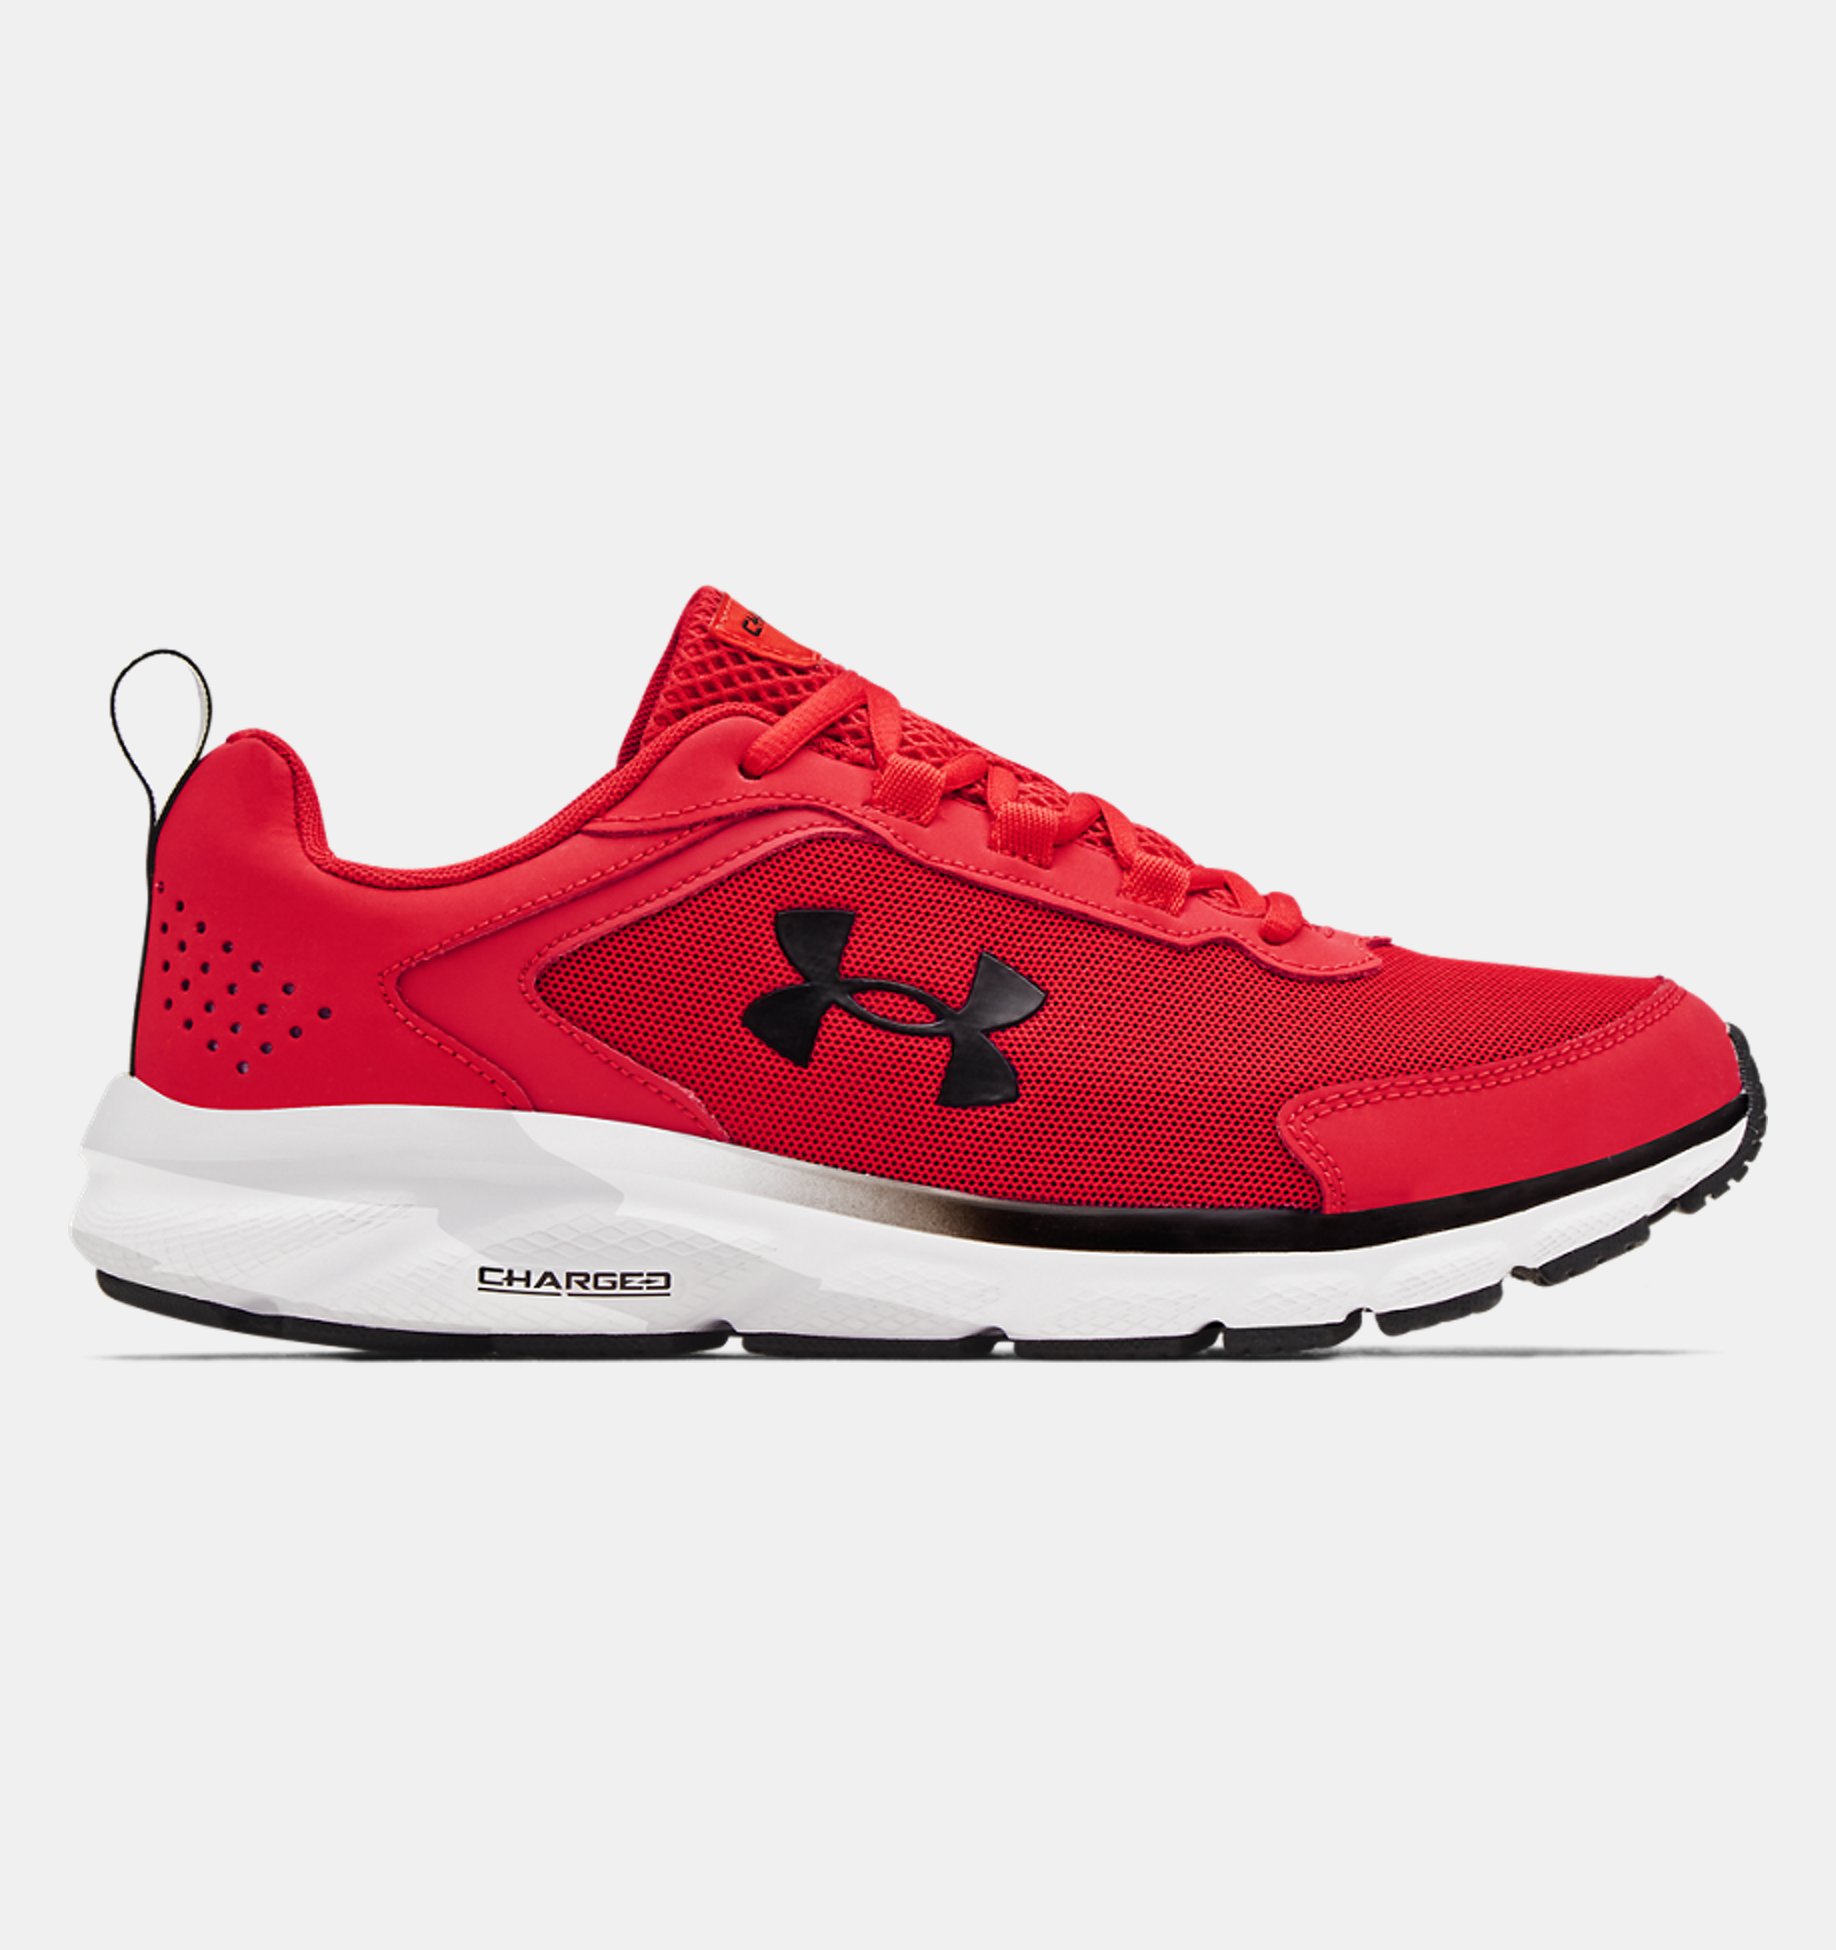 Under Amour: Men’s UA Charged Assert 9 Running Shoes $35.00